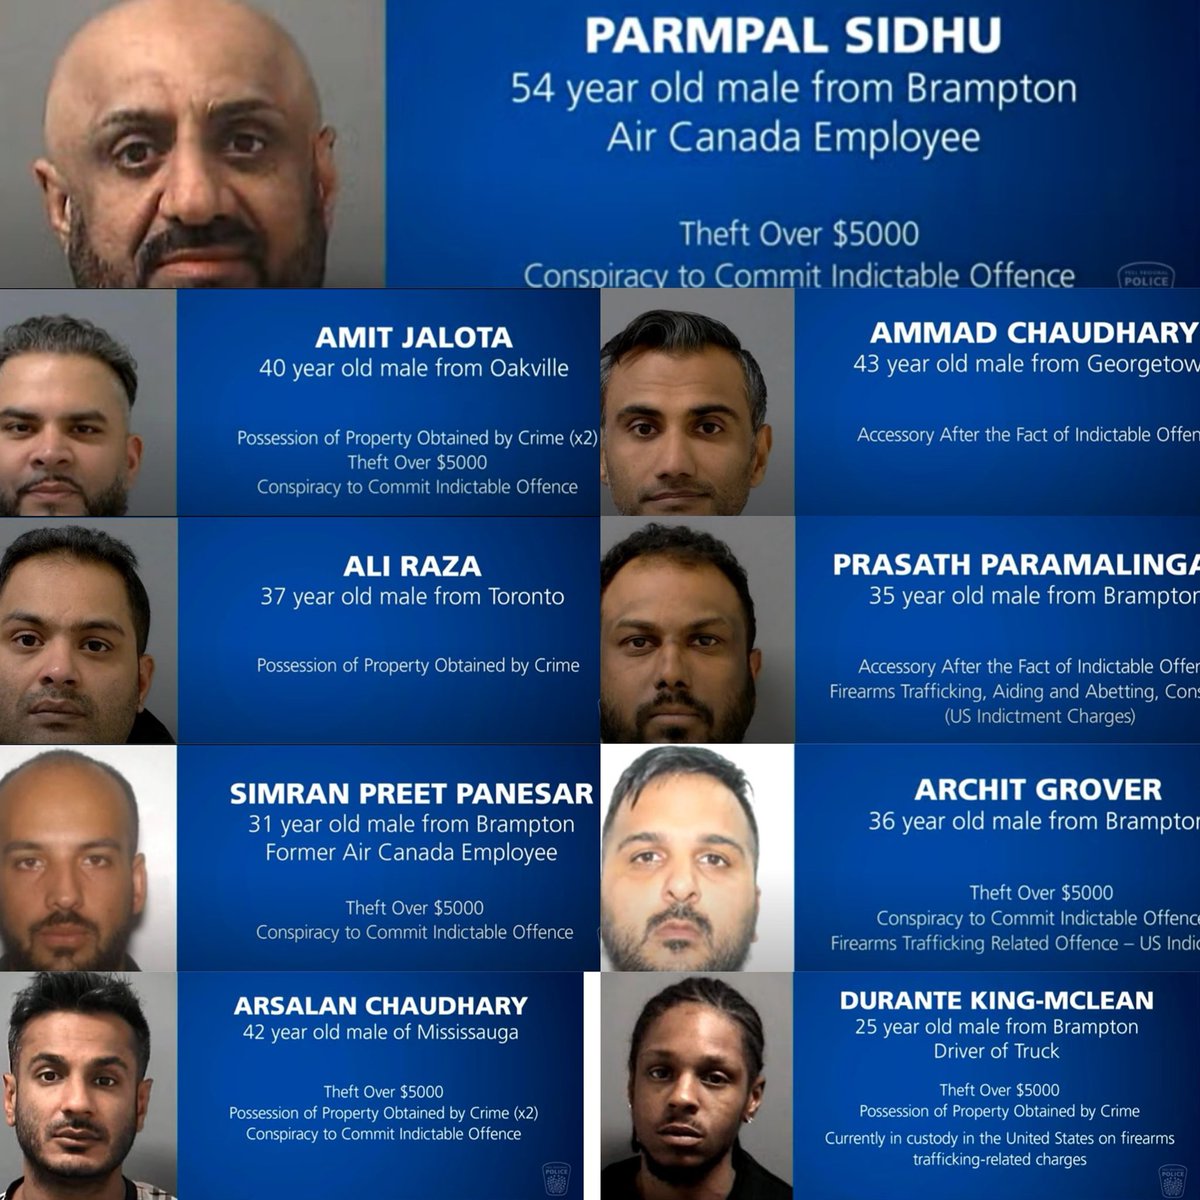 Police make multiple arrests in ‘largest gold theft in Canadian history’ 🇨🇦 Last year, a theft occurred at a Toronto Pearson International Airport facility, orchestrated by a 'well-organized group of criminals,' according to Peel Regional Police Chief Nishan Duraiappah. The